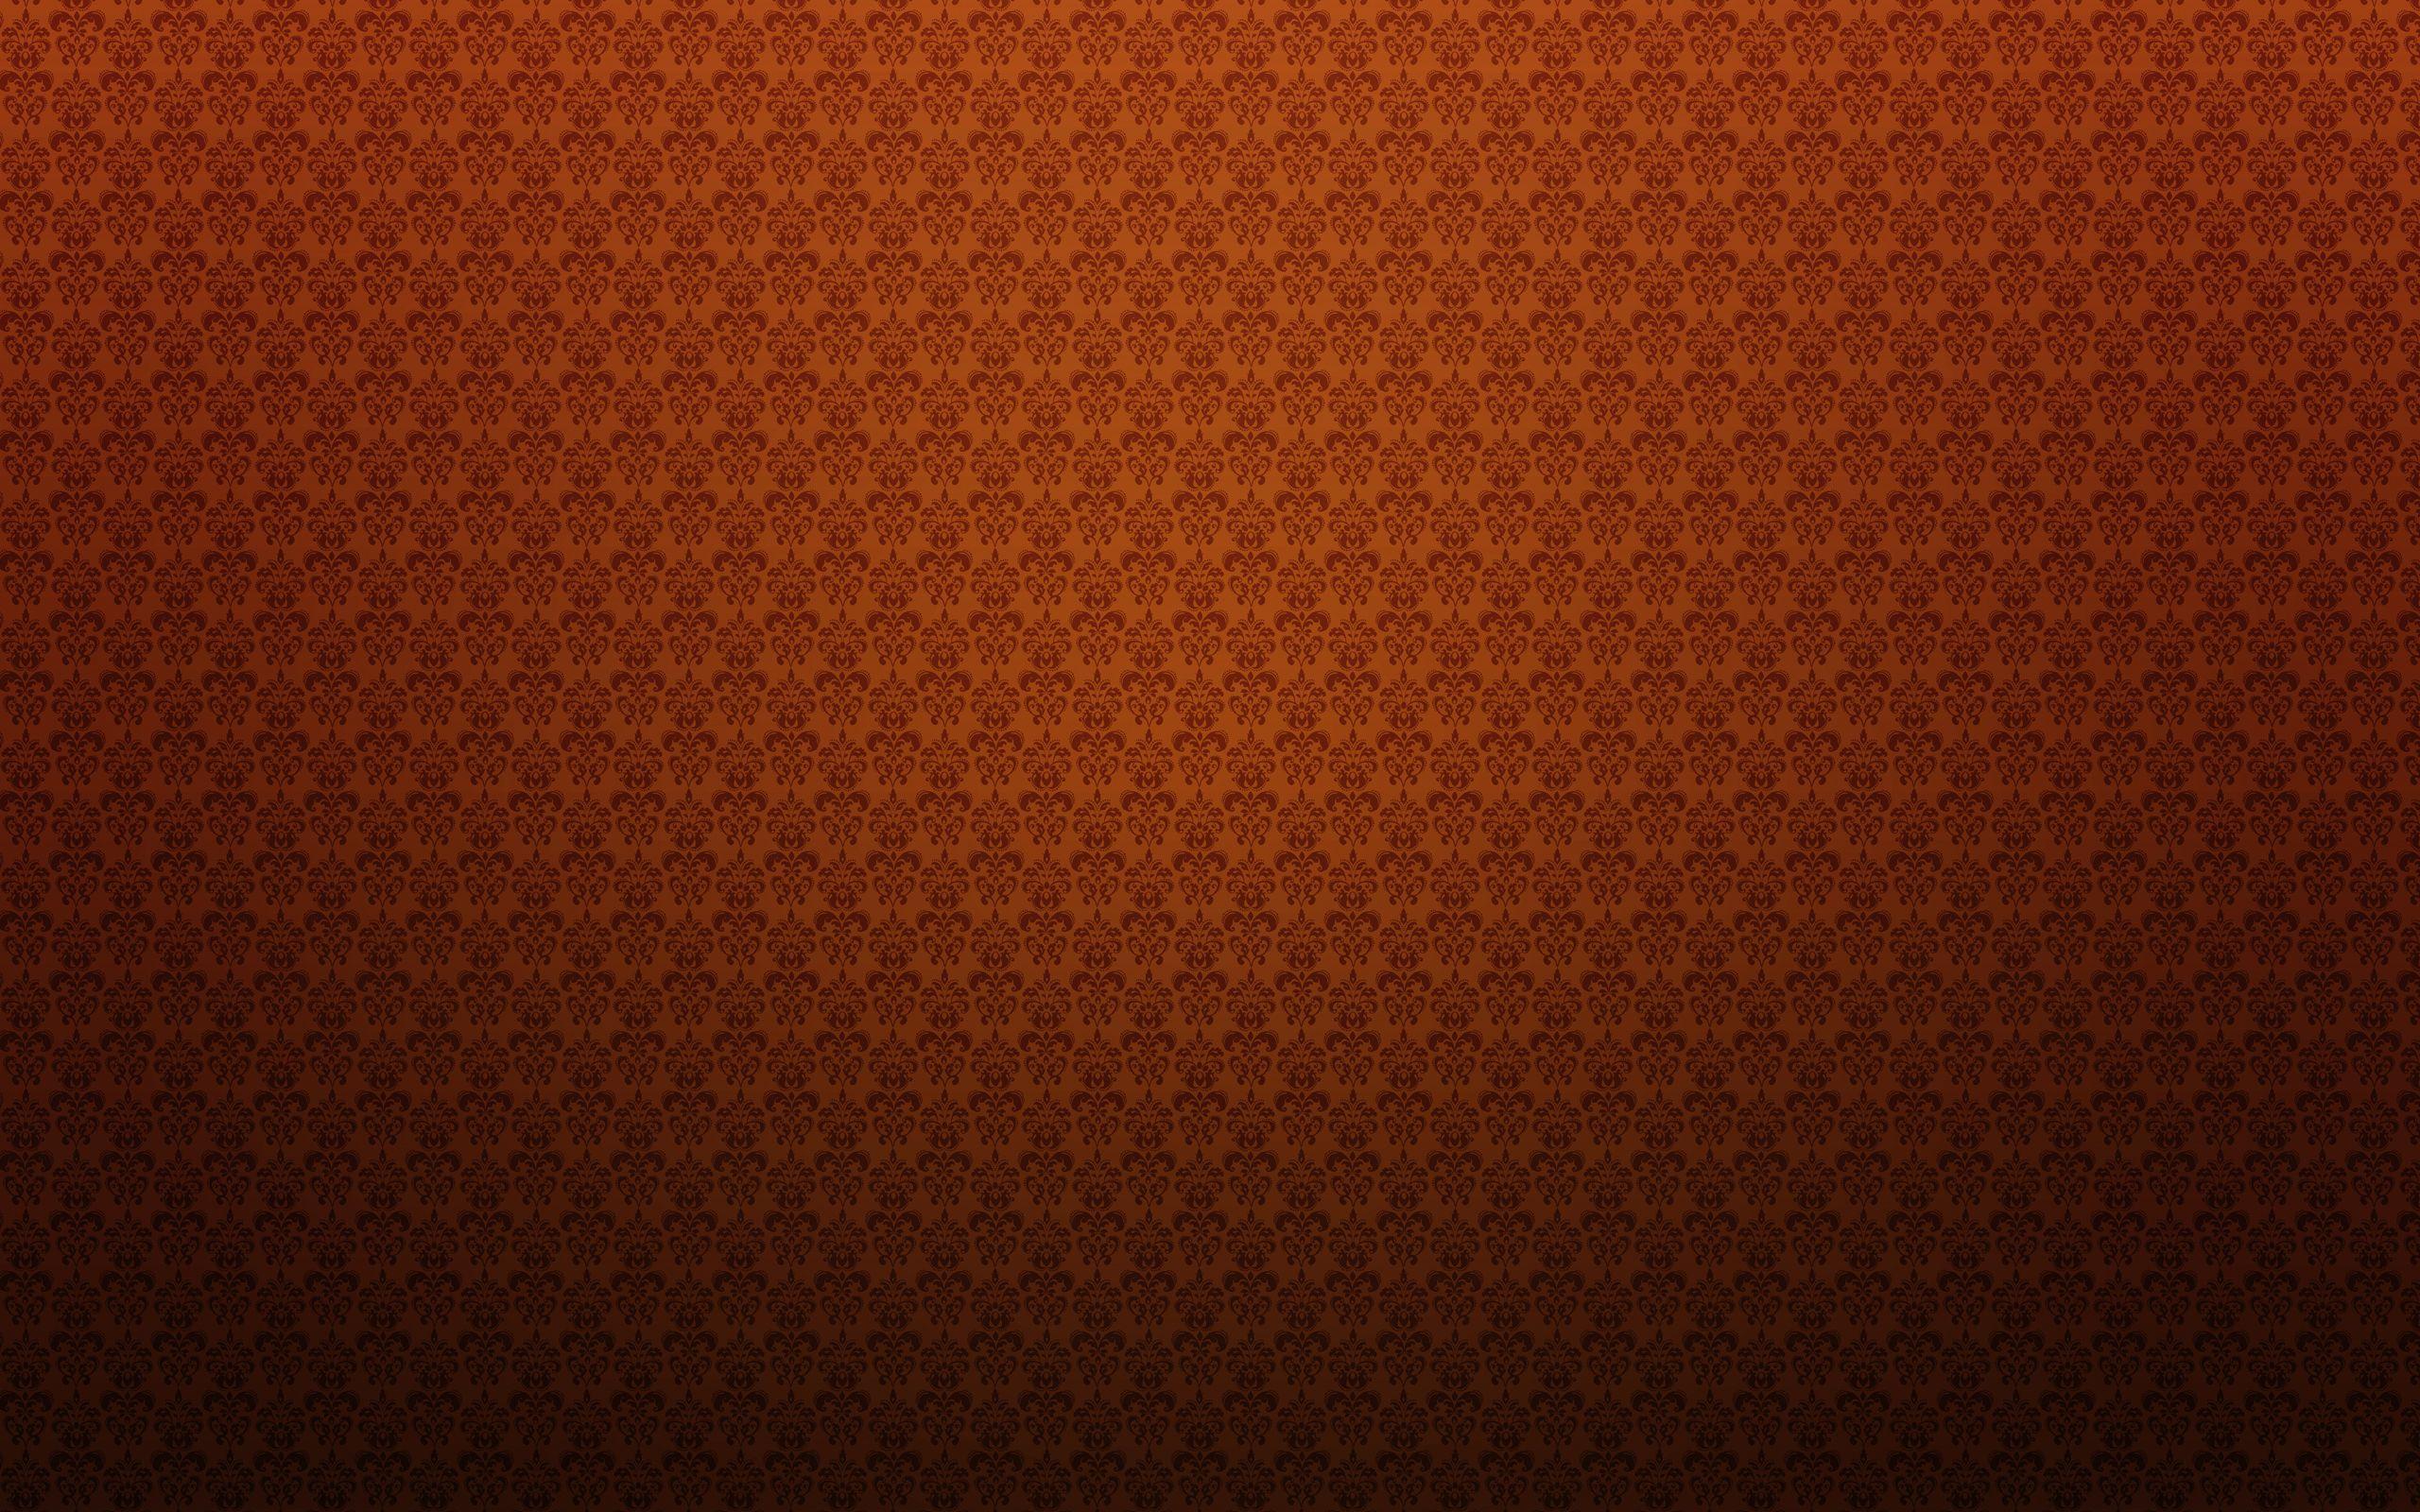 Brown Abstract Wallpapers - Top Free Brown Abstract Backgrounds ...